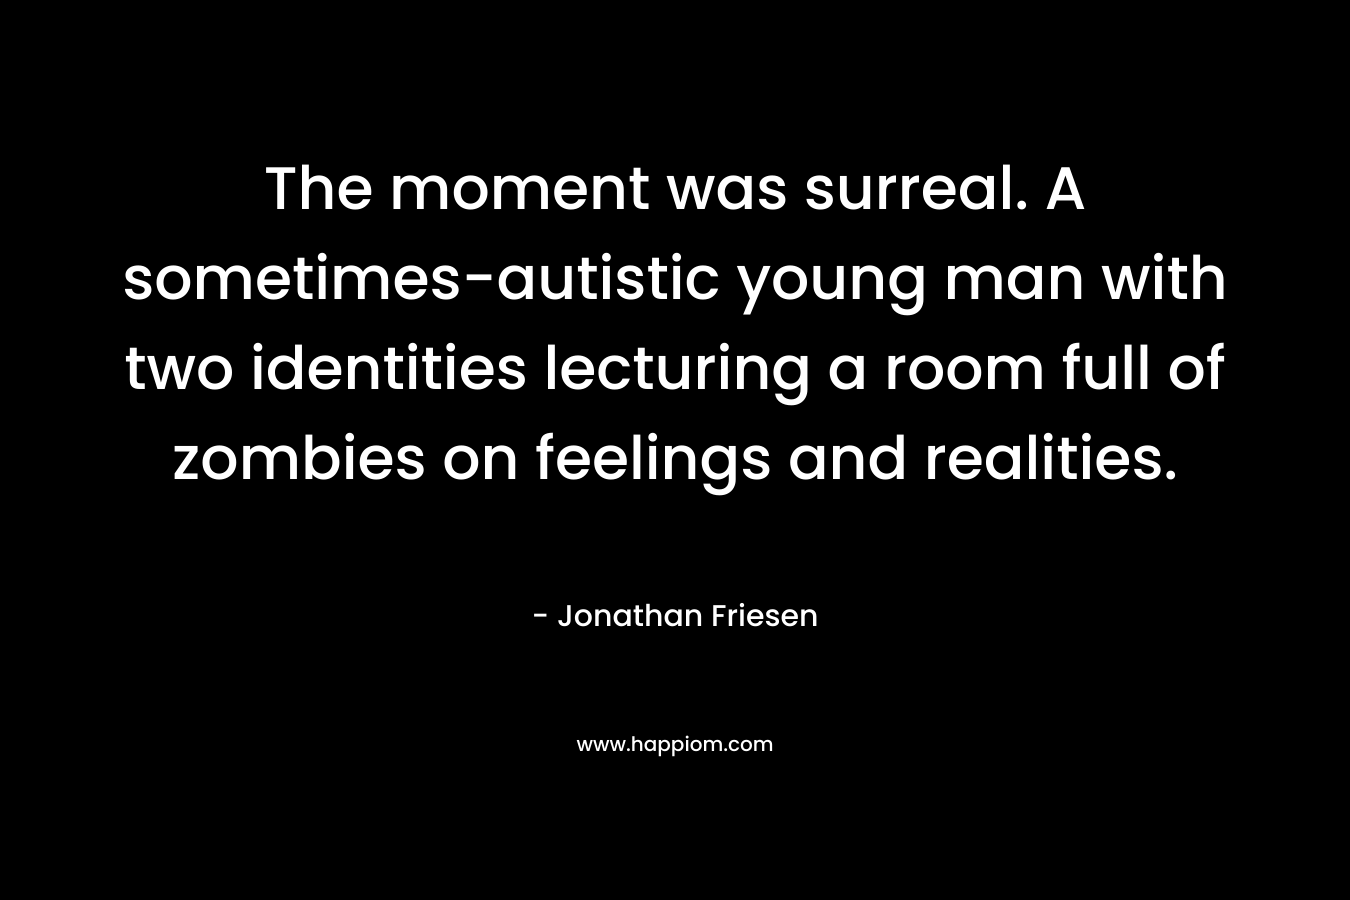 The moment was surreal. A sometimes-autistic young man with two identities lecturing a room full of zombies on feelings and realities. – Jonathan Friesen